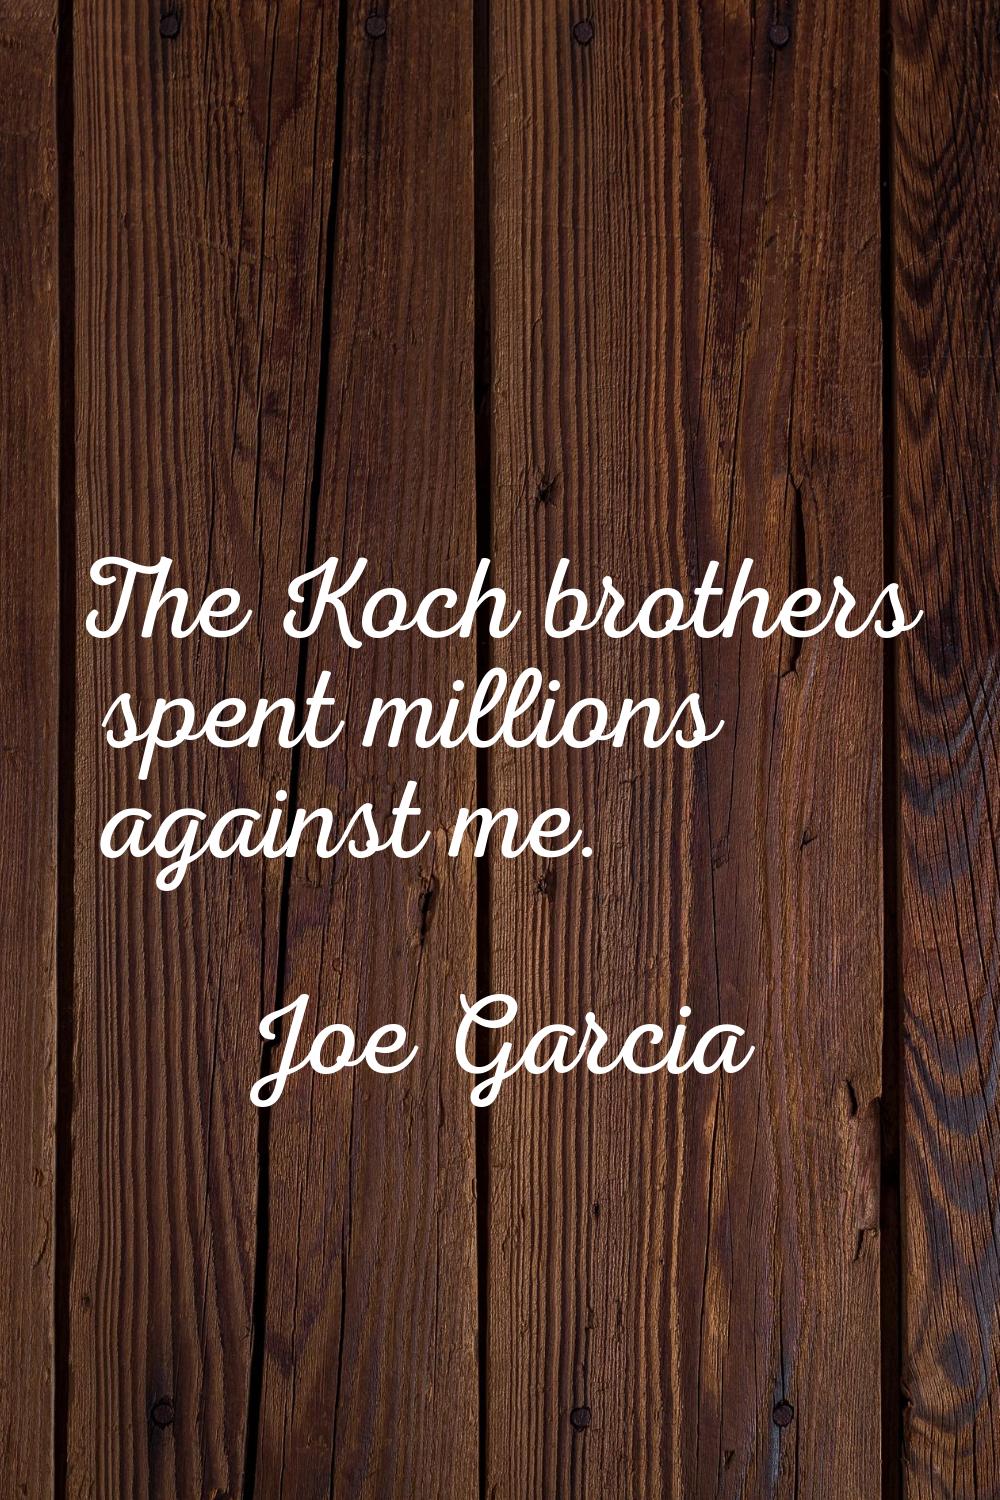 The Koch brothers spent millions against me.